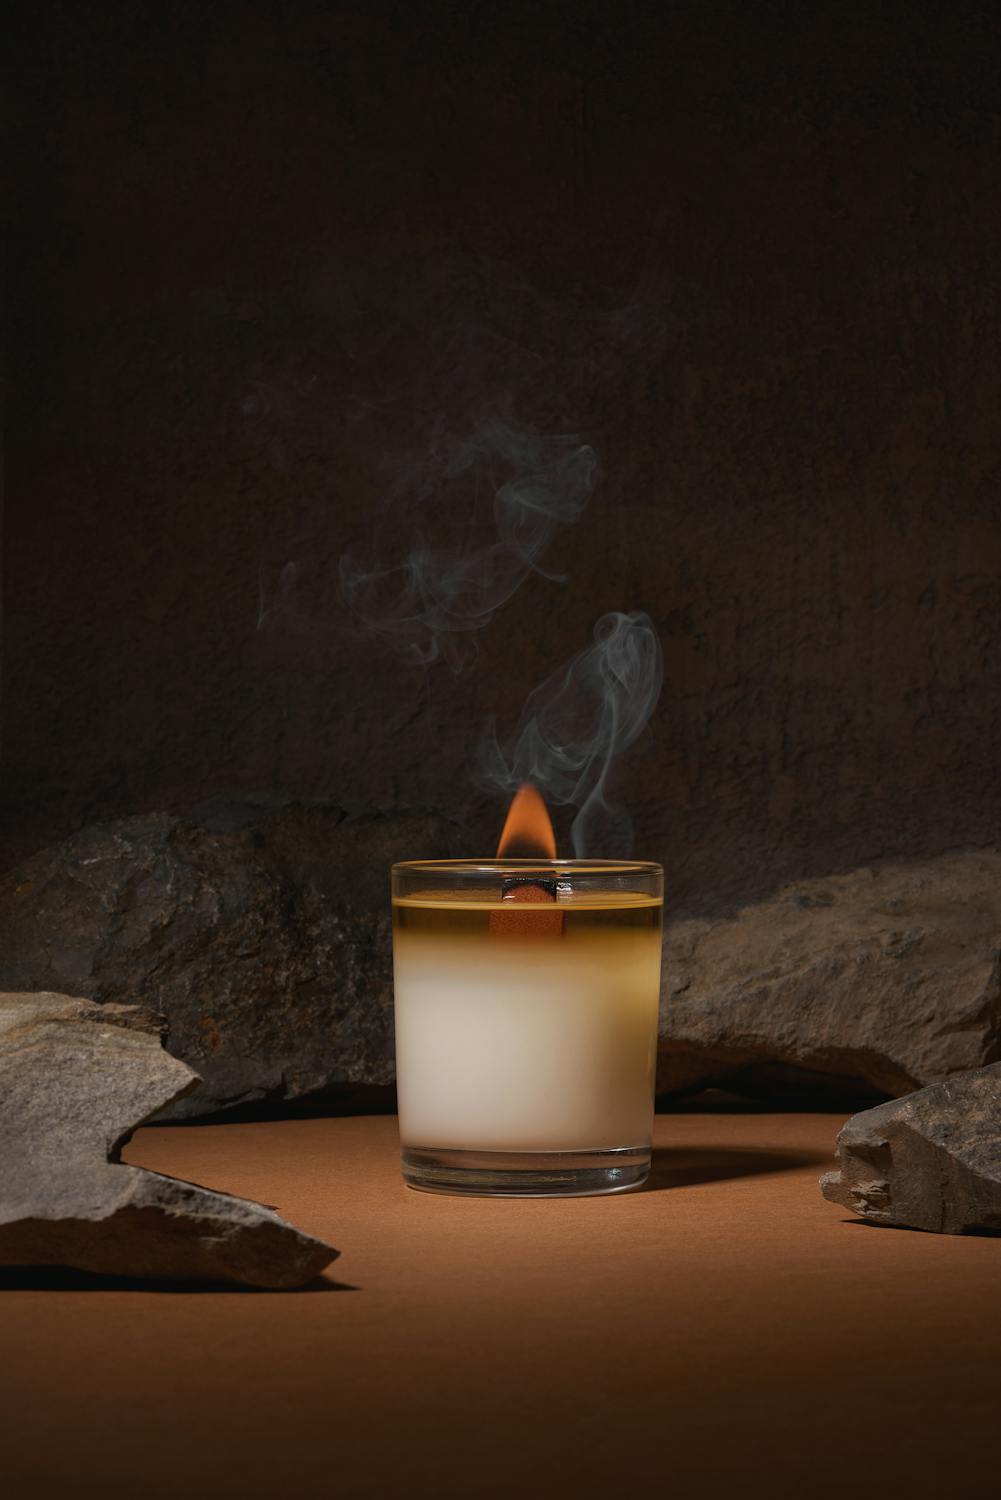 Burning fuming candle placed near boulders · Free Stock Photo